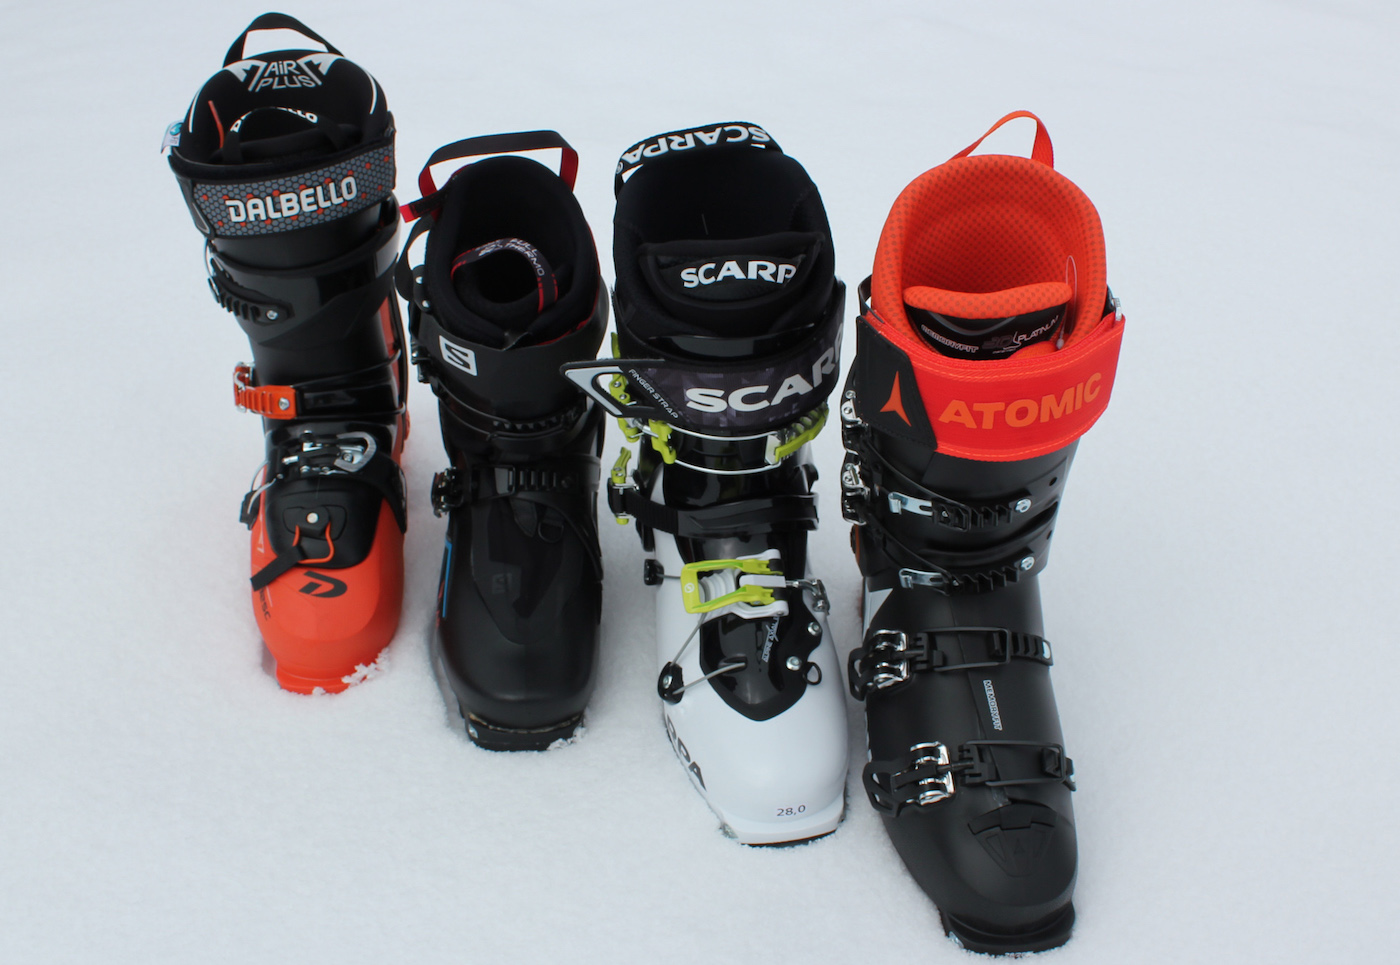 district Person in charge Enlighten The Best Lightweight Alpine Touring Ski Boots | Reviews and Buying Advice |  Gear Institute